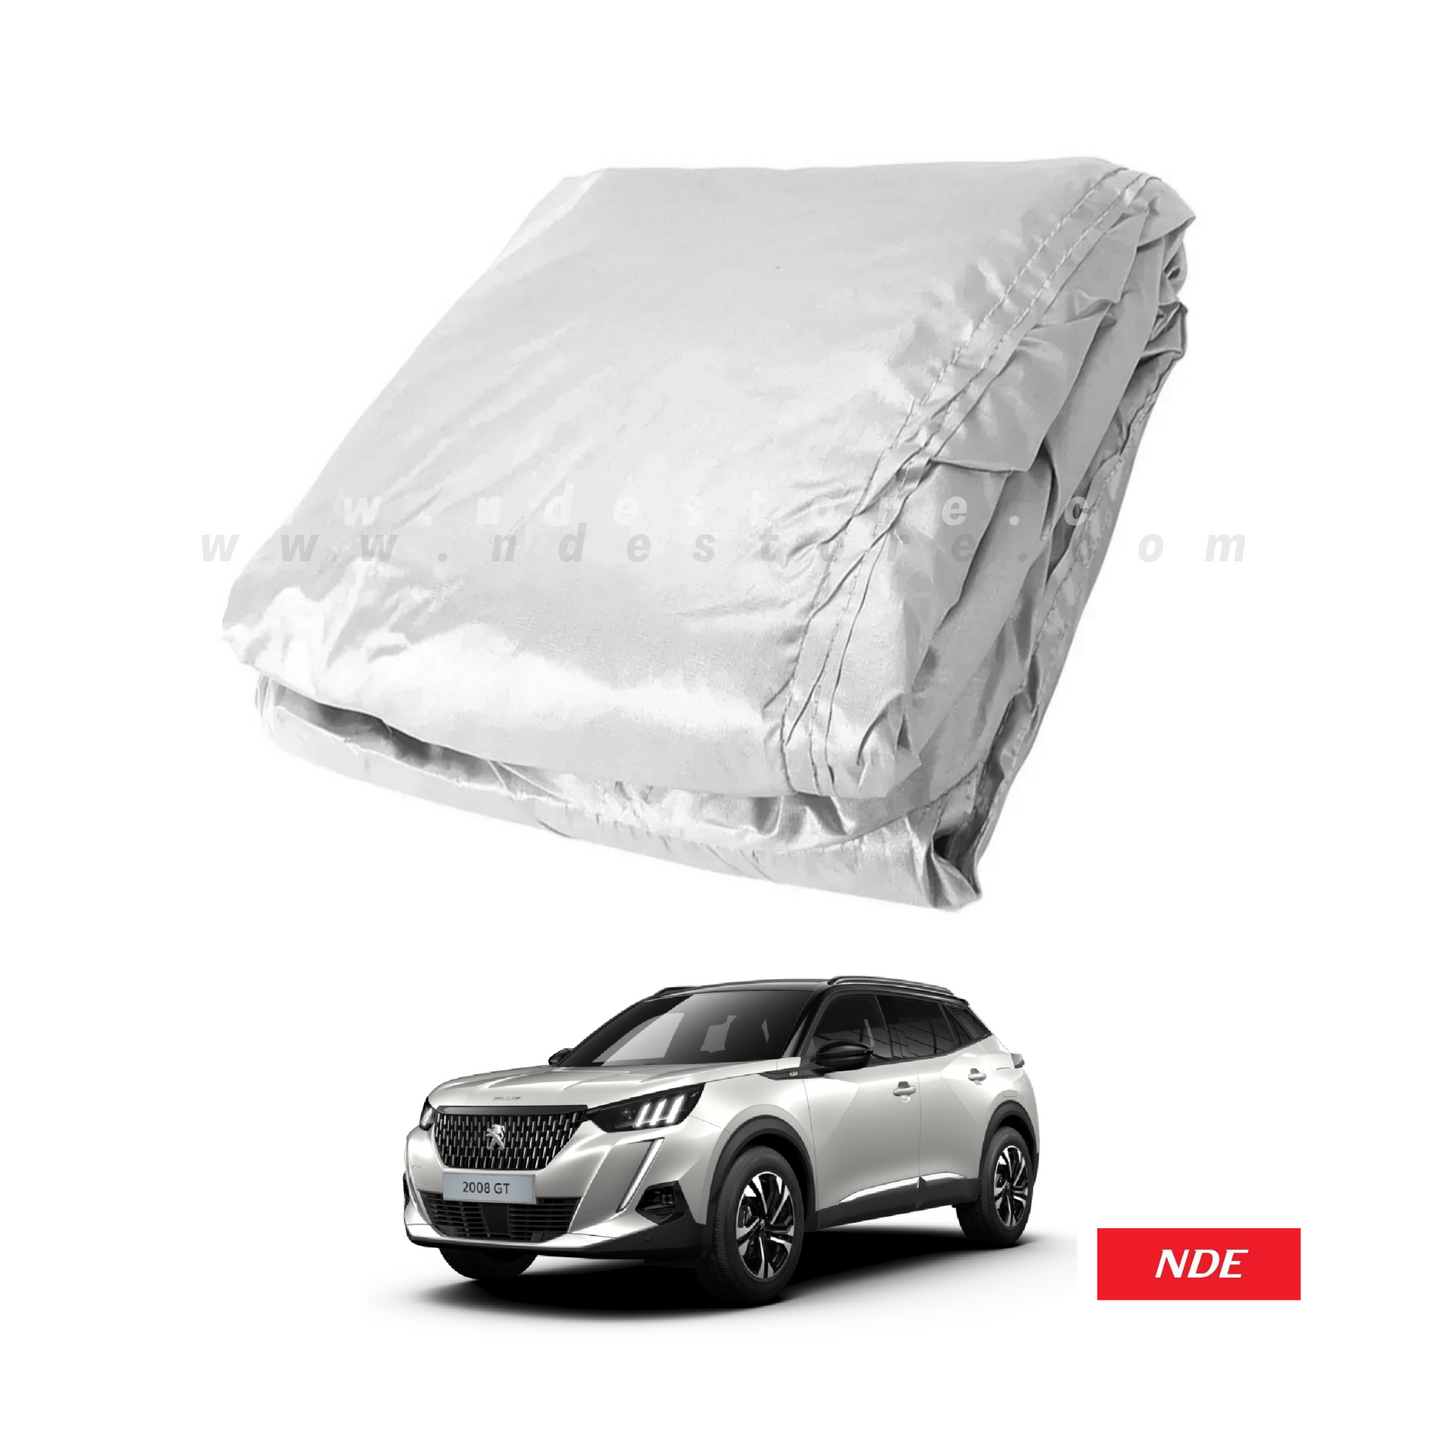 TOP COVER IMPORTED MATERIAL FOR PEUGEOT 2008